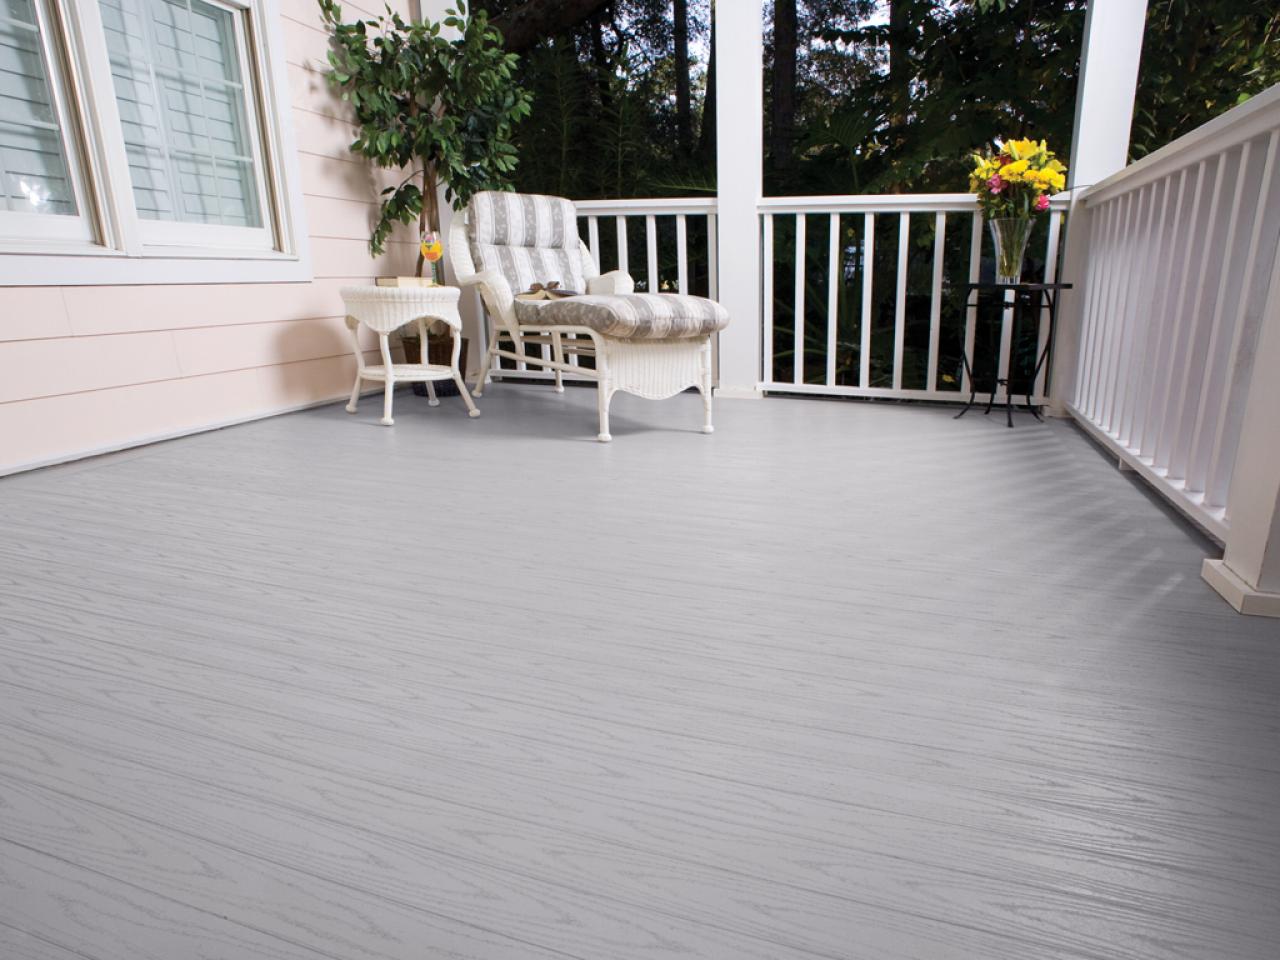 Porch Flooring And Foundation, Front Porch Tile Flooring Ideas